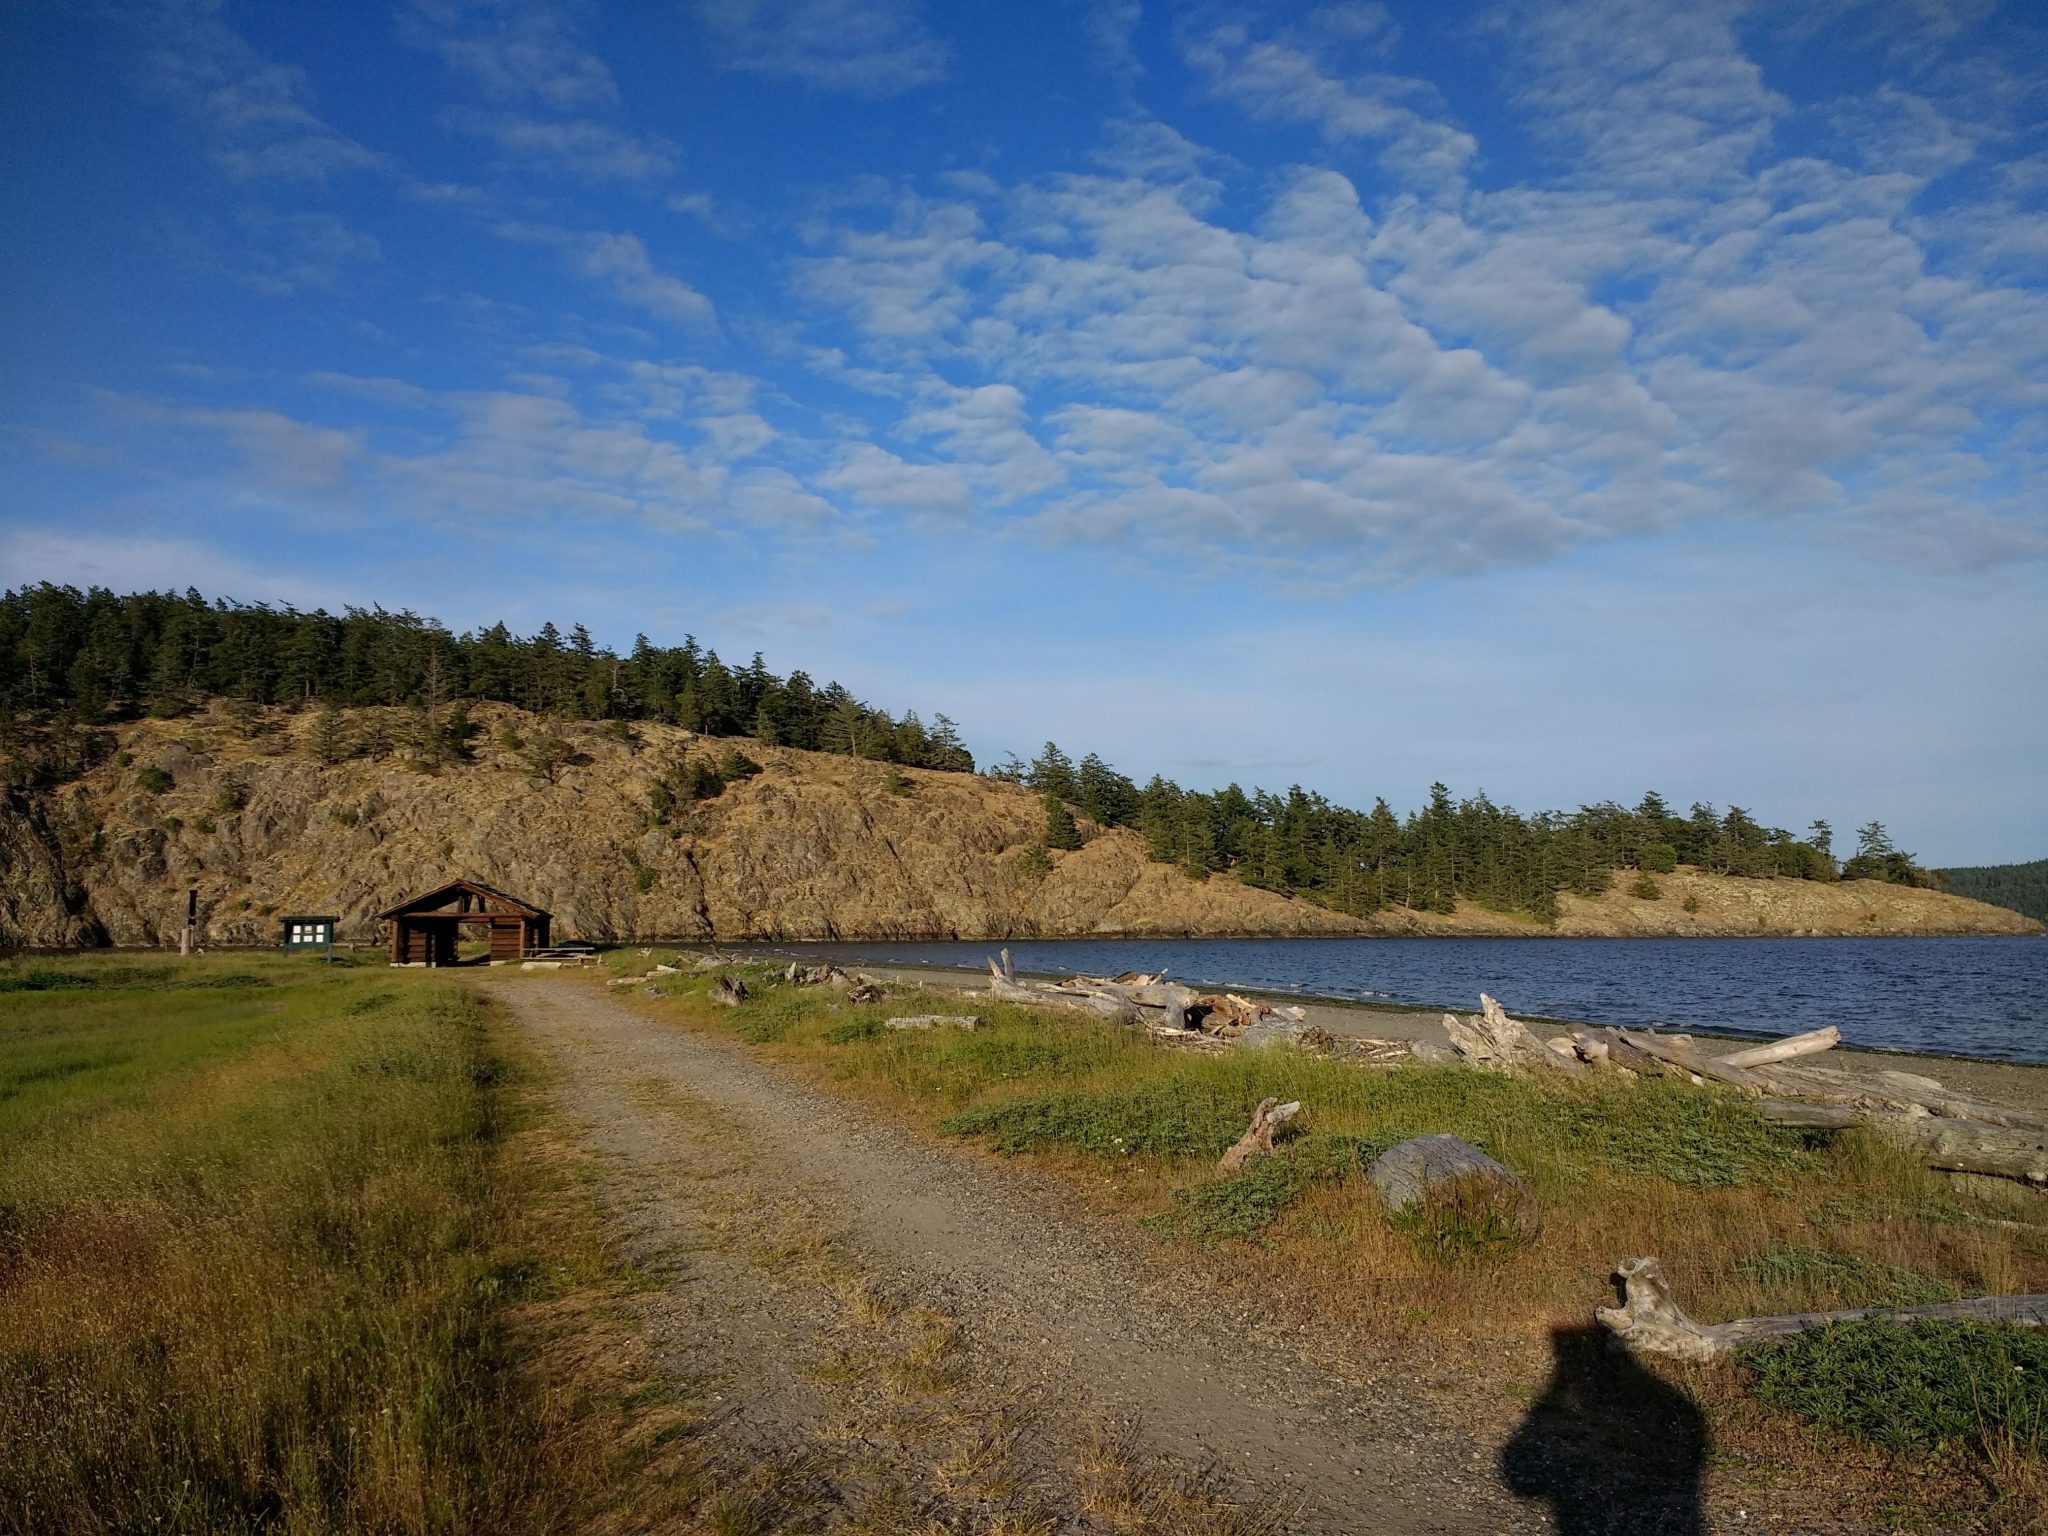 A piece of land sticks out into the water. It has a wide, gravel trail in the middle, and beach with driftwood to the side of the trail and the grass. In the distance there is a wooden shelter and a steep, forested island